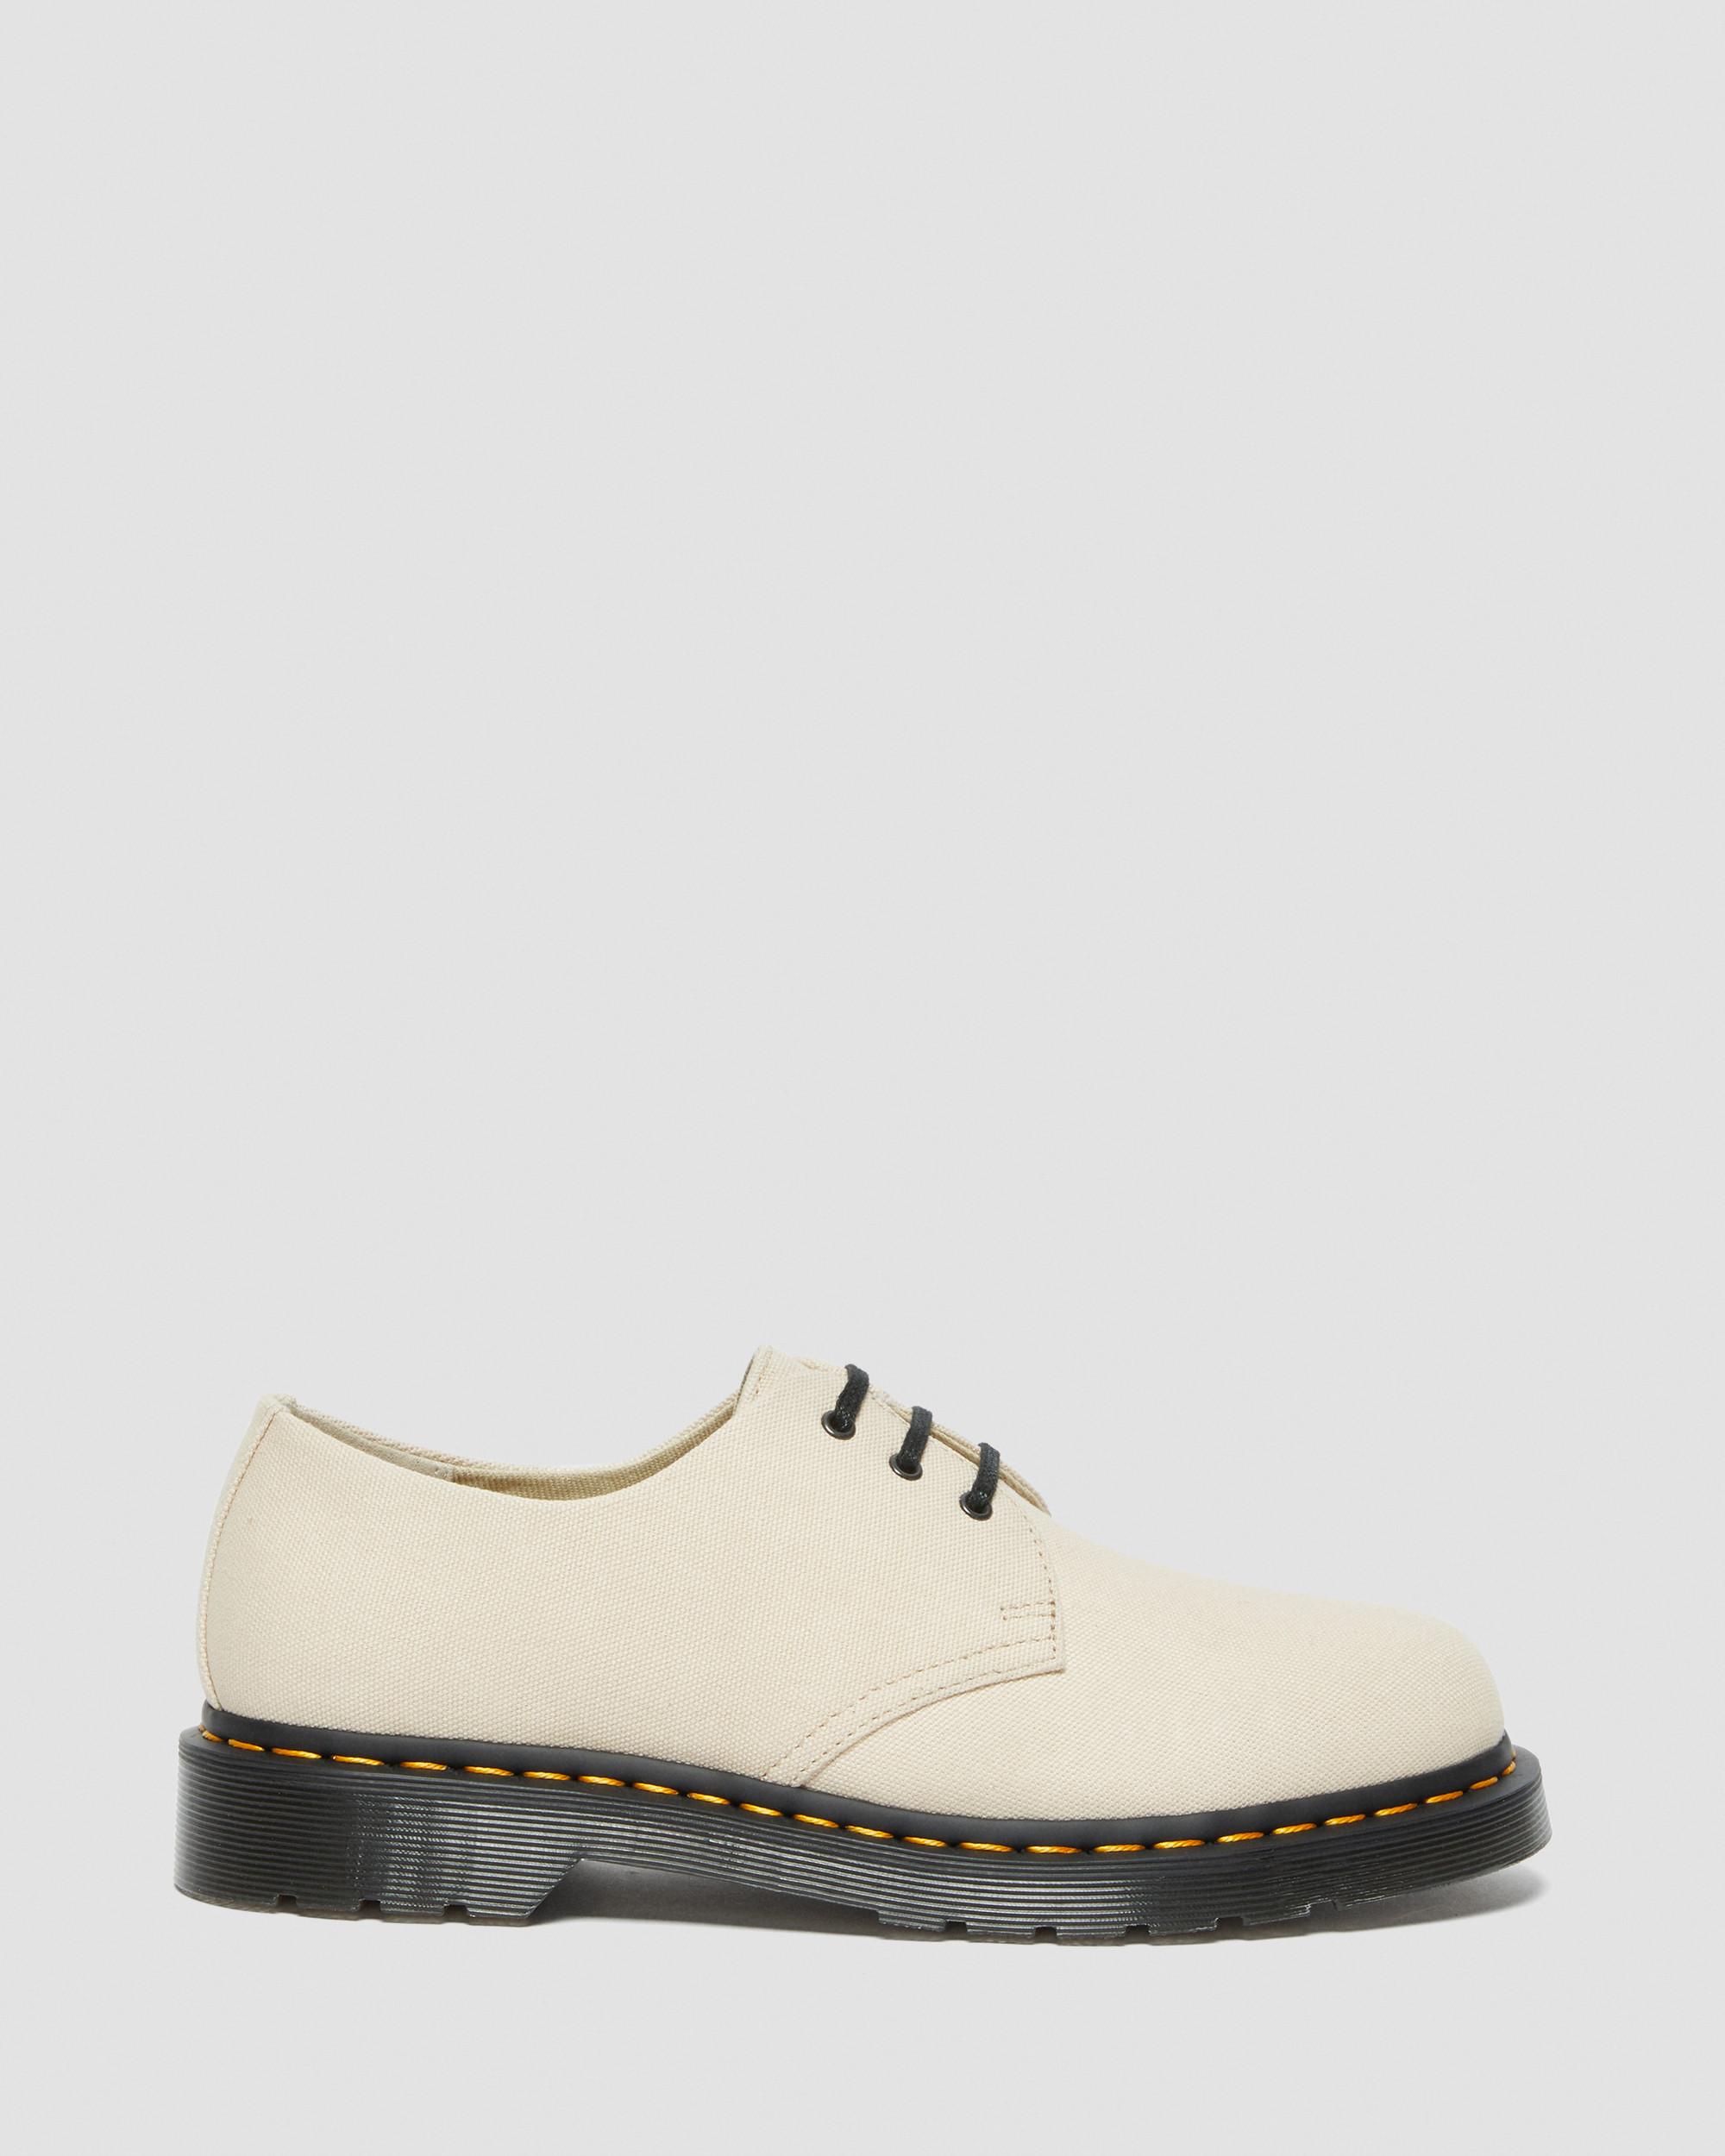 1461 Canvas Oxford Shoes in Sand | Dr. Martens